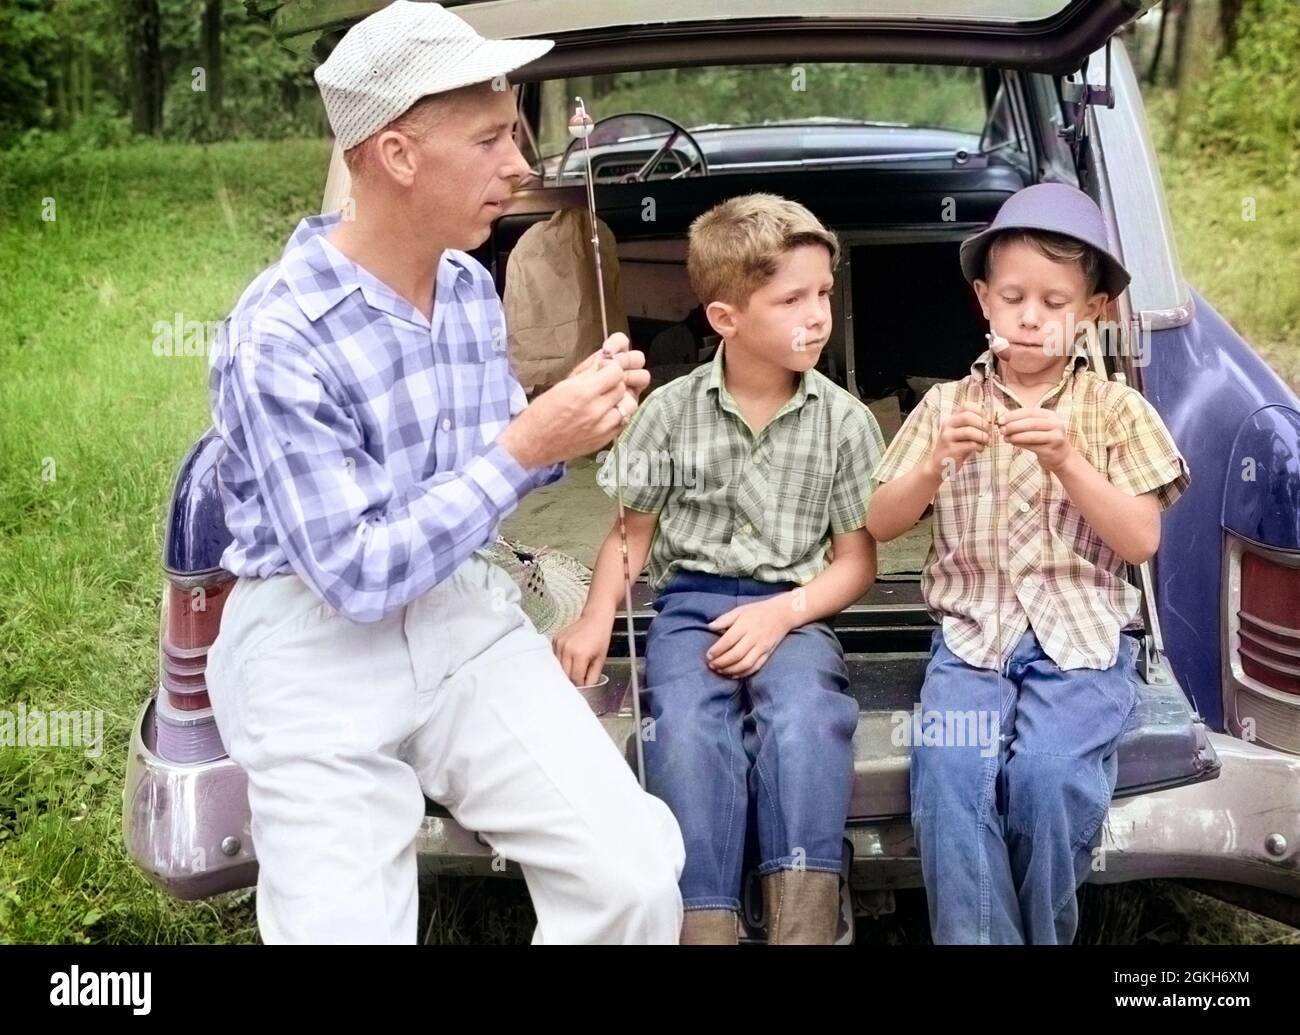 1950s 1960s FATHER TWO YOUNG SONS WITH FISHING RODS BY CAR OUTDOOR - a2309c  LAN001 HARS BROTHER OLD FASHION AUTO 1 JUVENILE POLE VEHICLE VACATION SONS  LIFESTYLE PARENTING BROTHERS RELATION FISHERMAN NATURE